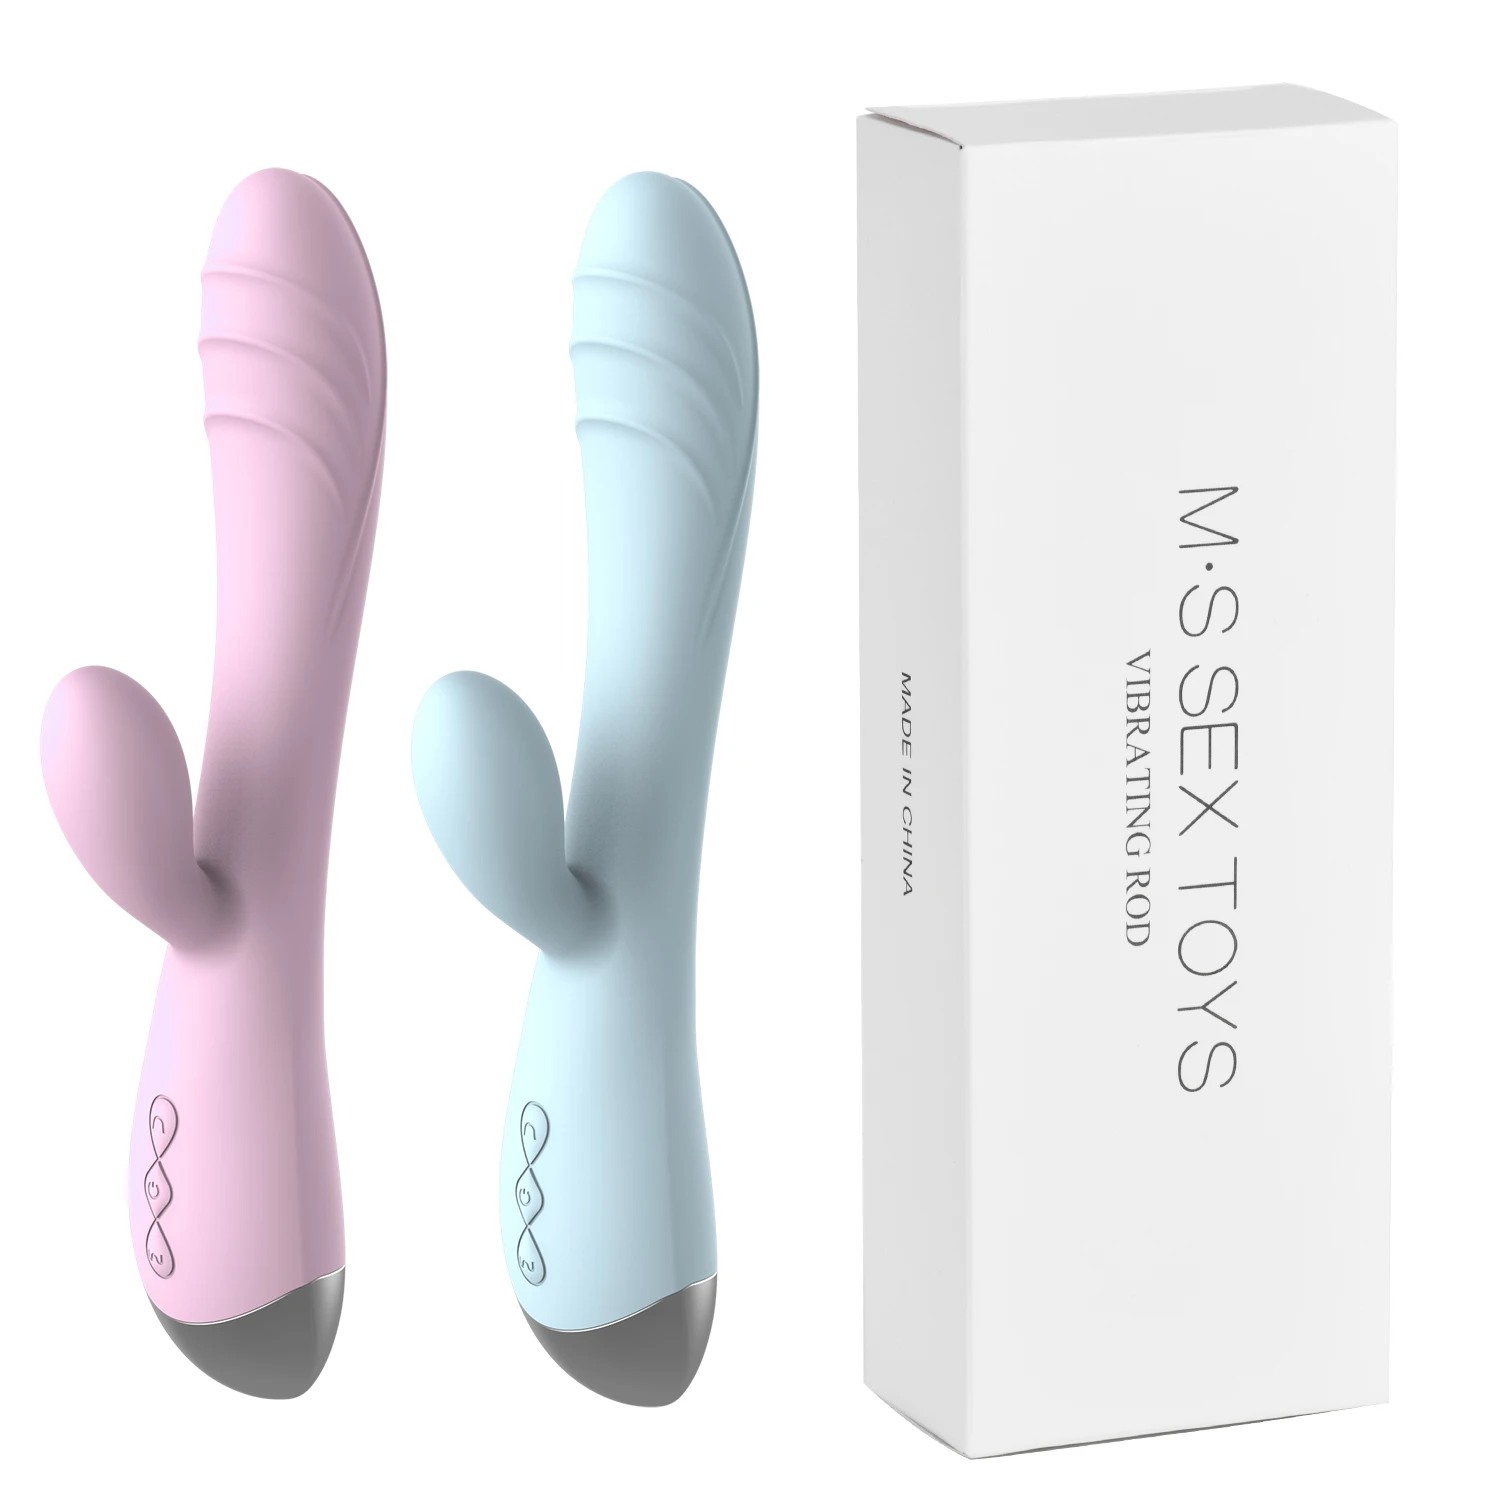 Wholesale Hot Selling 10 Frequency Pussy Adult Product Sex Toy Vibrator Wireless Wand Massager From m.alibaba photo